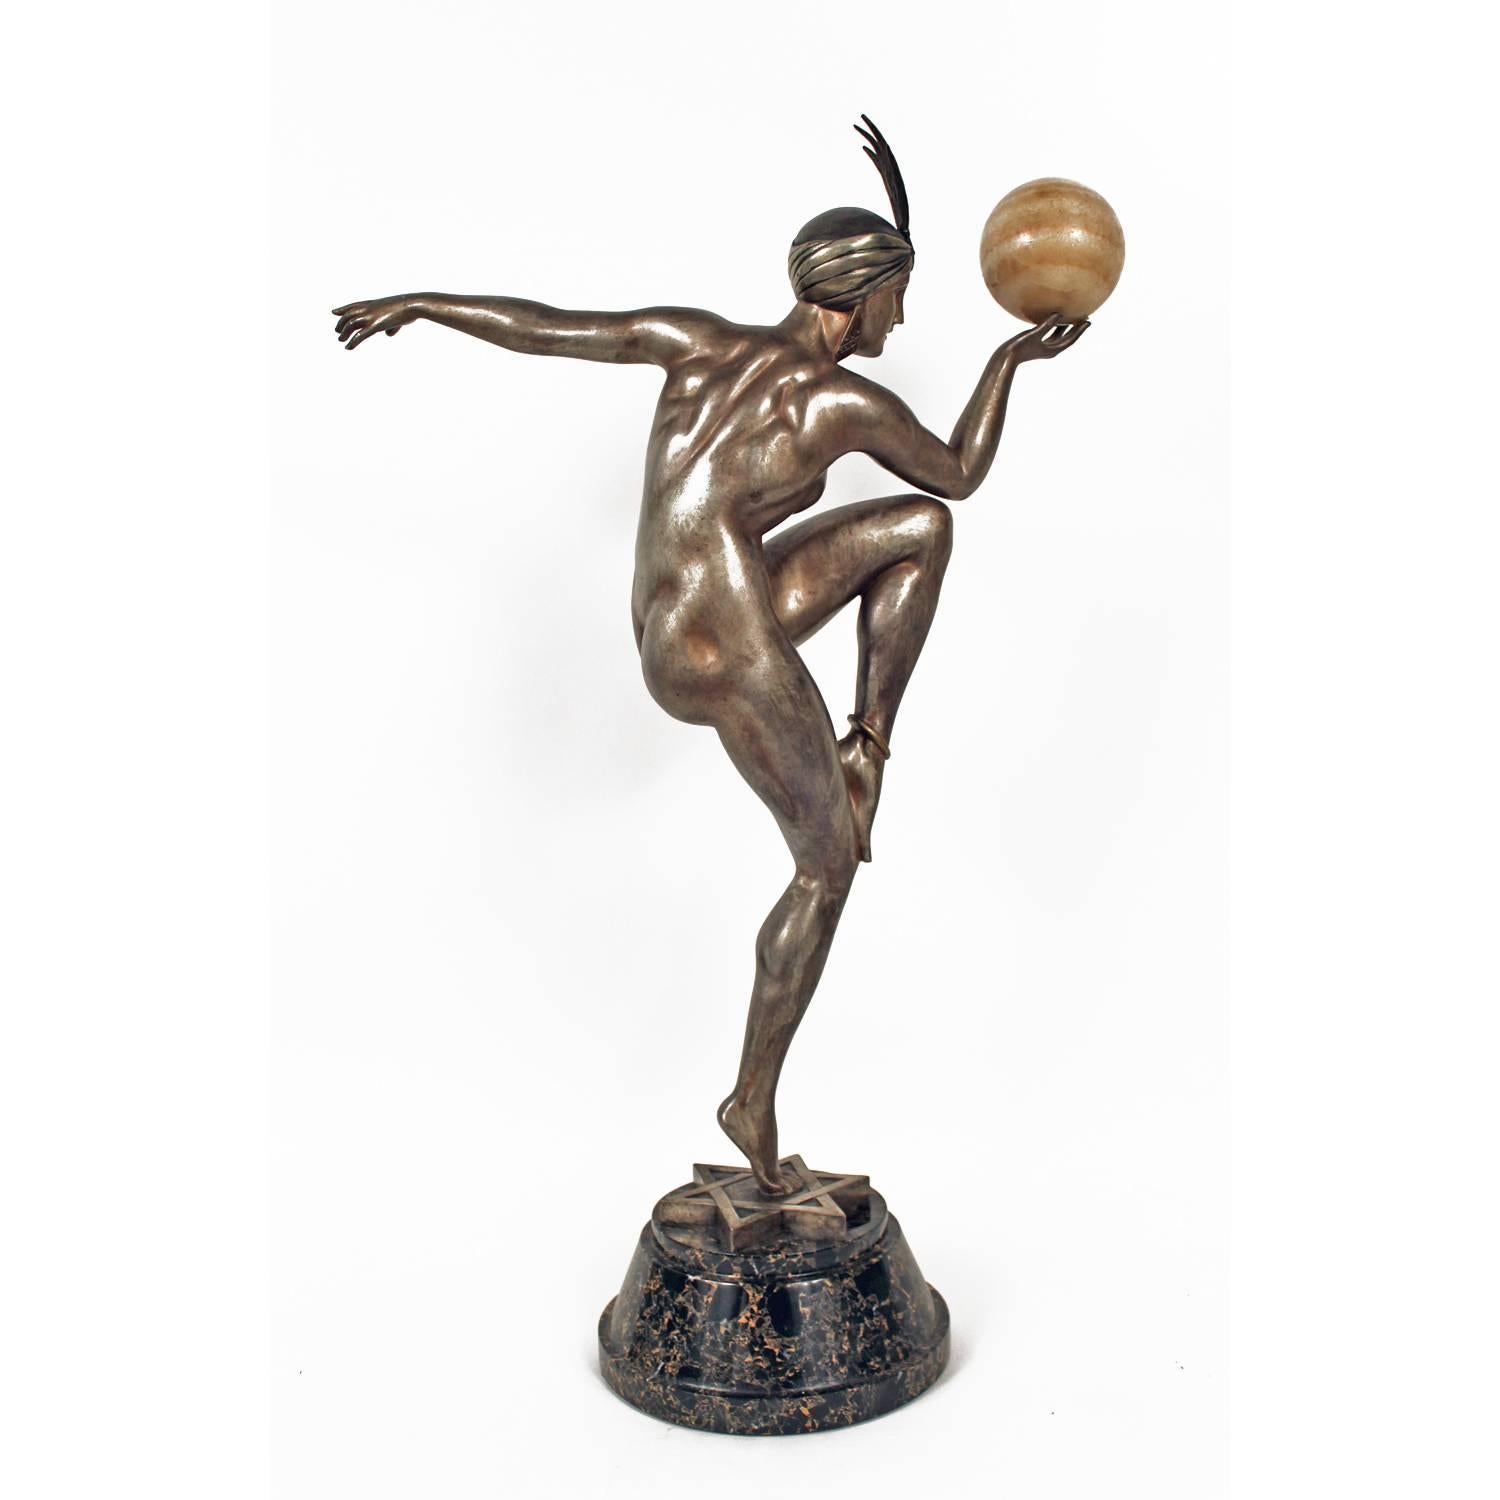 Iconic Art Deco silver plated bronze sculpture entitled Stella by Maurice Guiraud-Riviere depicting a female figure holding a marble globe.
Made in France
circa 1925
Signature: Guiraud-Riviere.